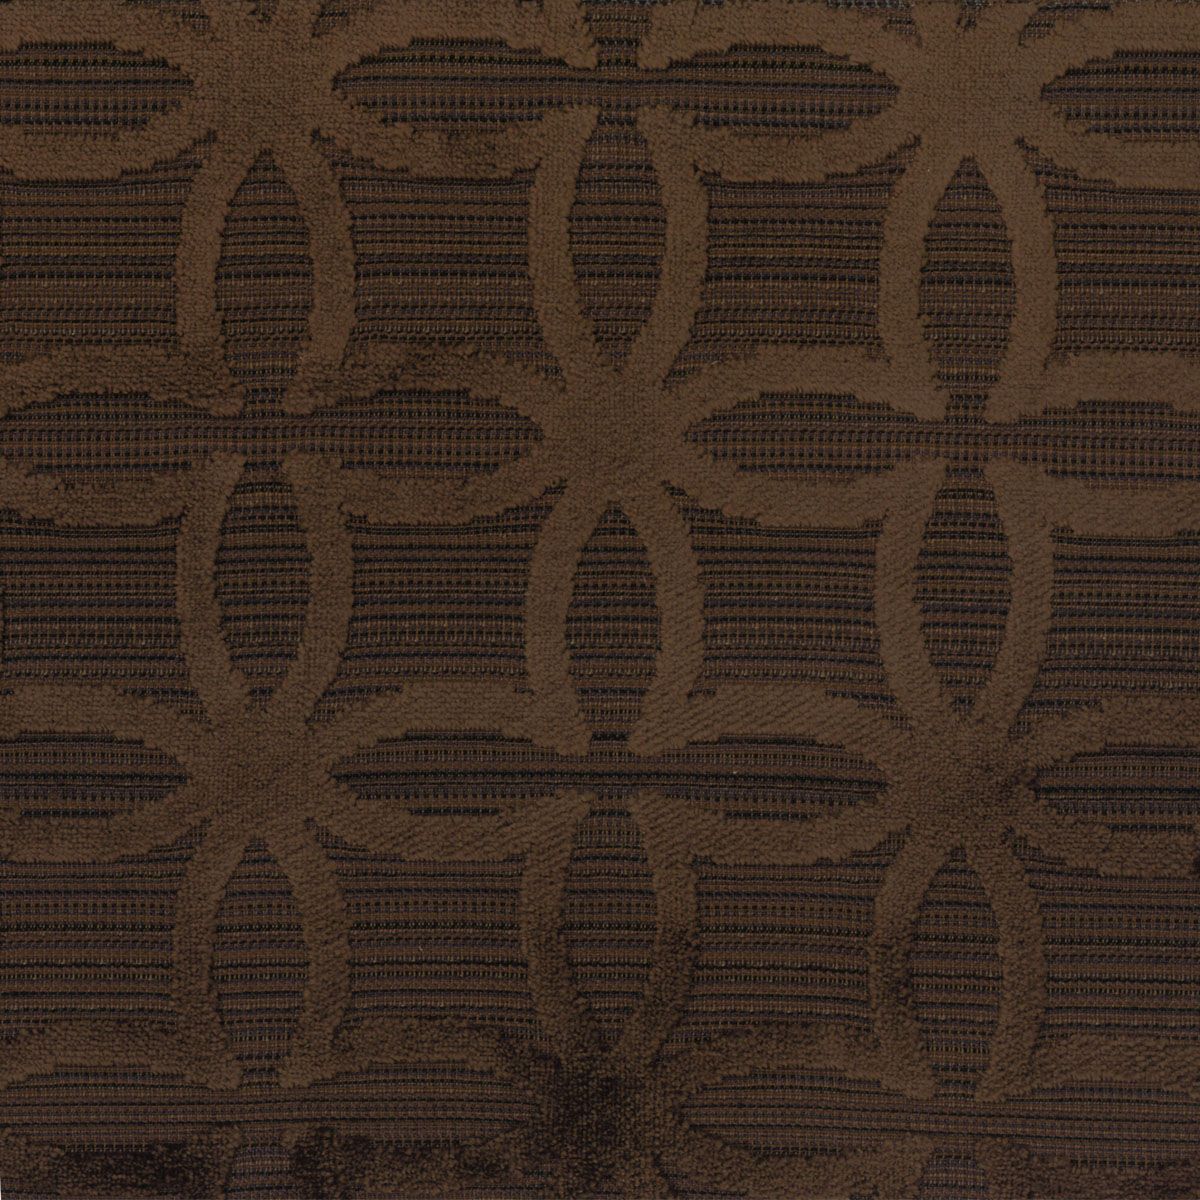 Spyra fabric in ganache color - pattern number AL 05120001 - by Scalamandre in the Old World Weavers collection